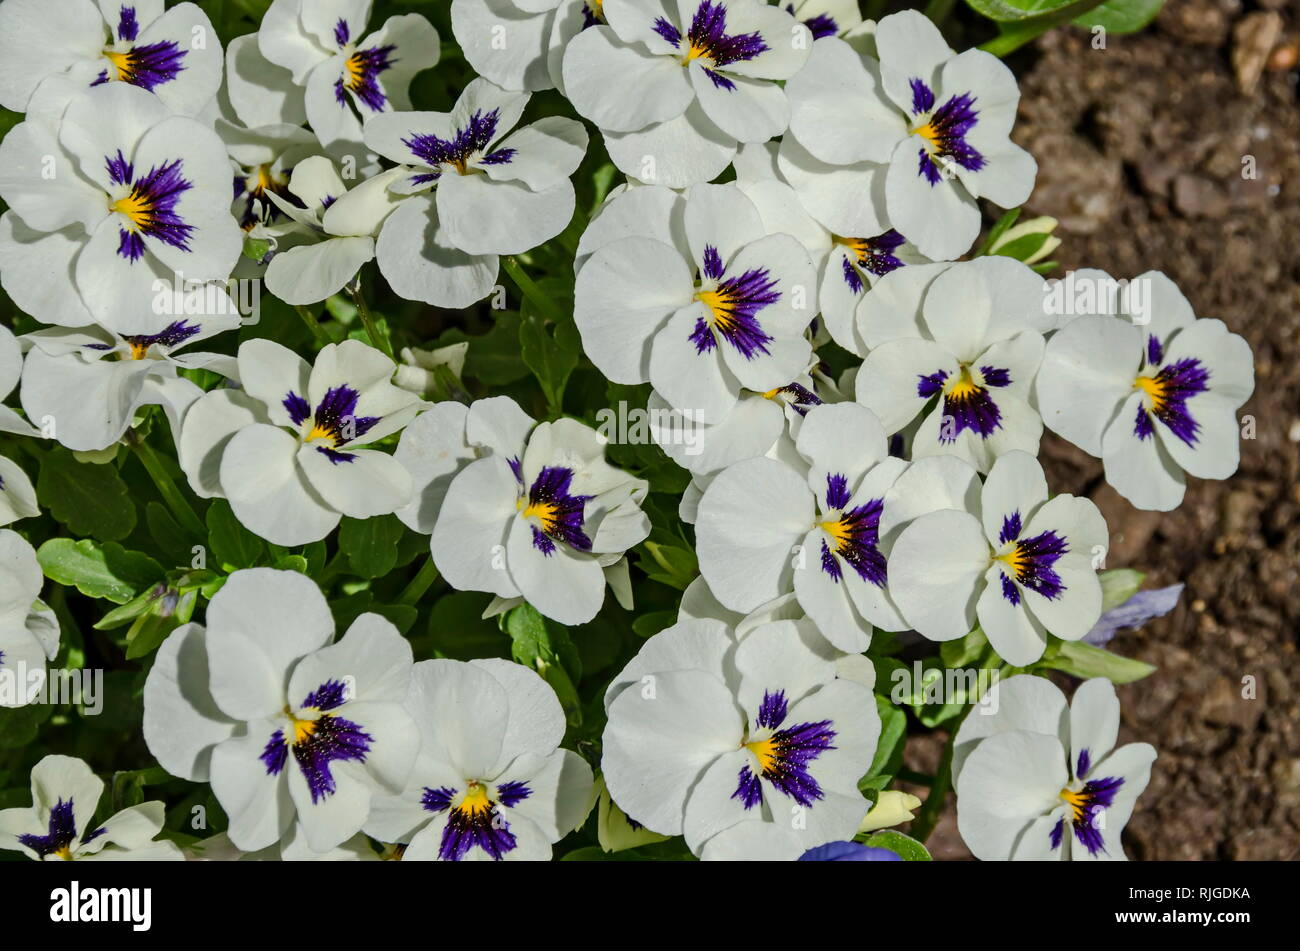 Mixed of purple and white color pansy, Viola altaica or violet flower covered with snow, Pancharevo, Sofia, Bulgaria Stock Photo